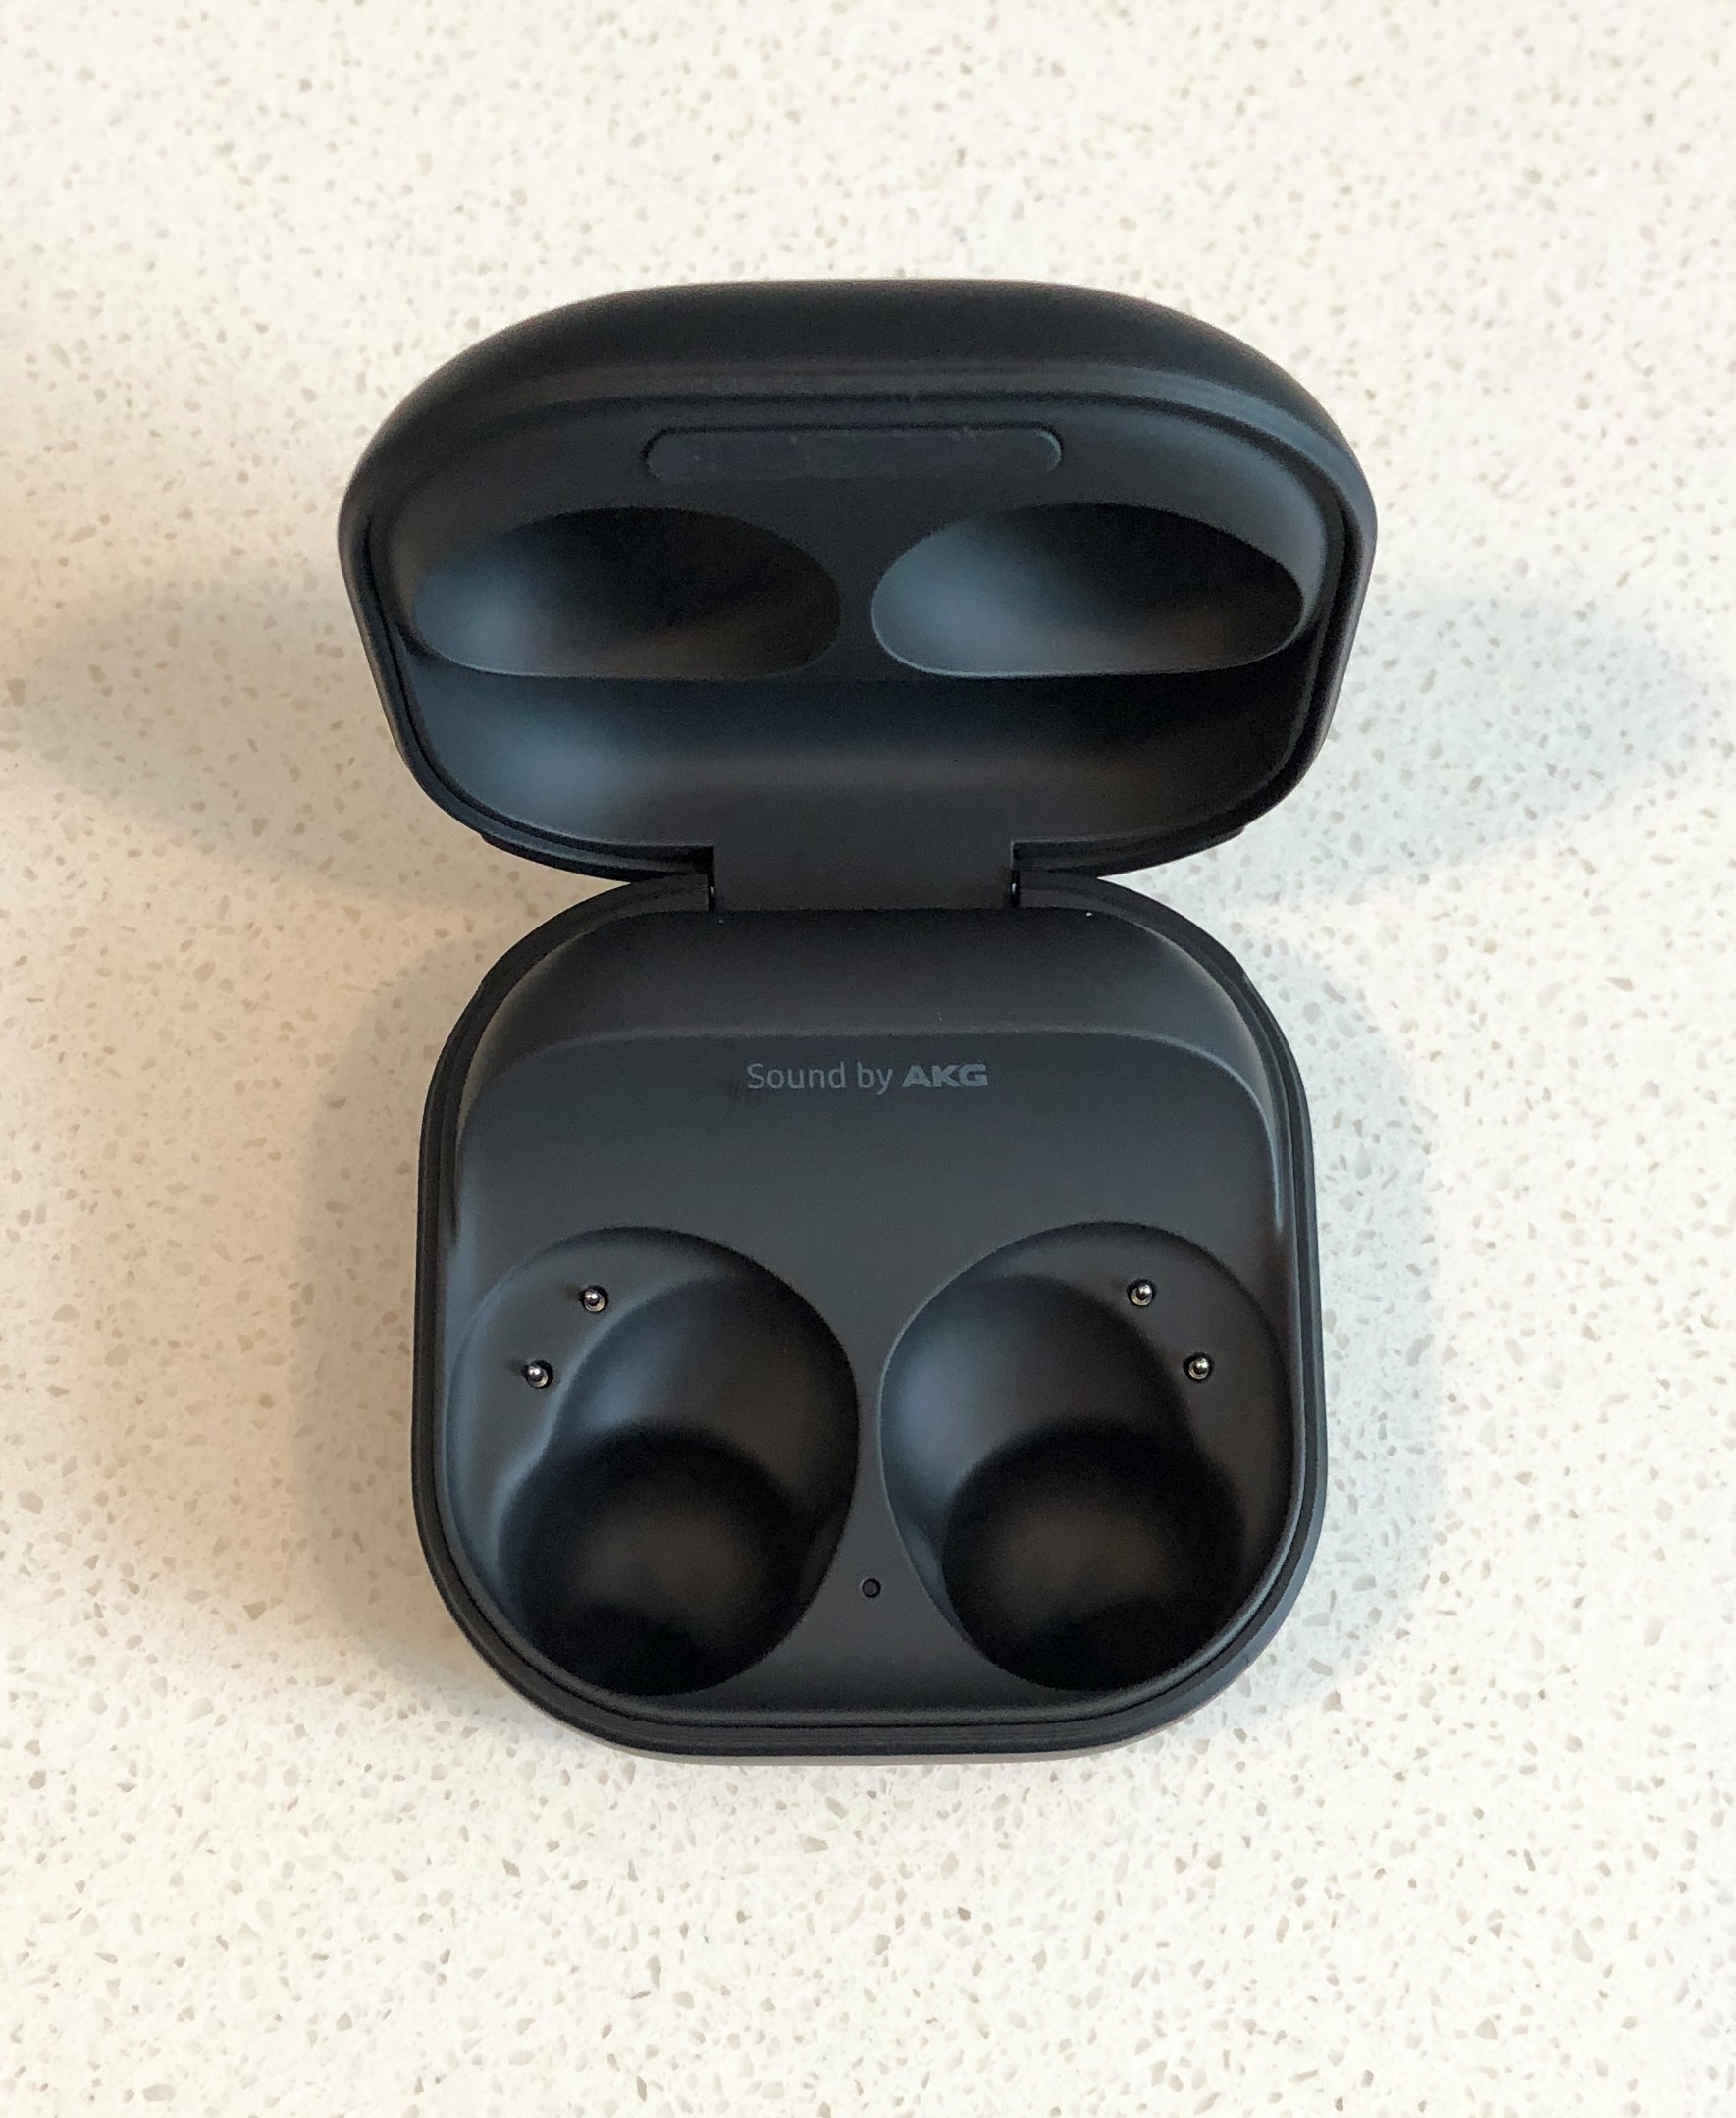 Samsung Galaxy Buds2 Pro charging and carrying case inside